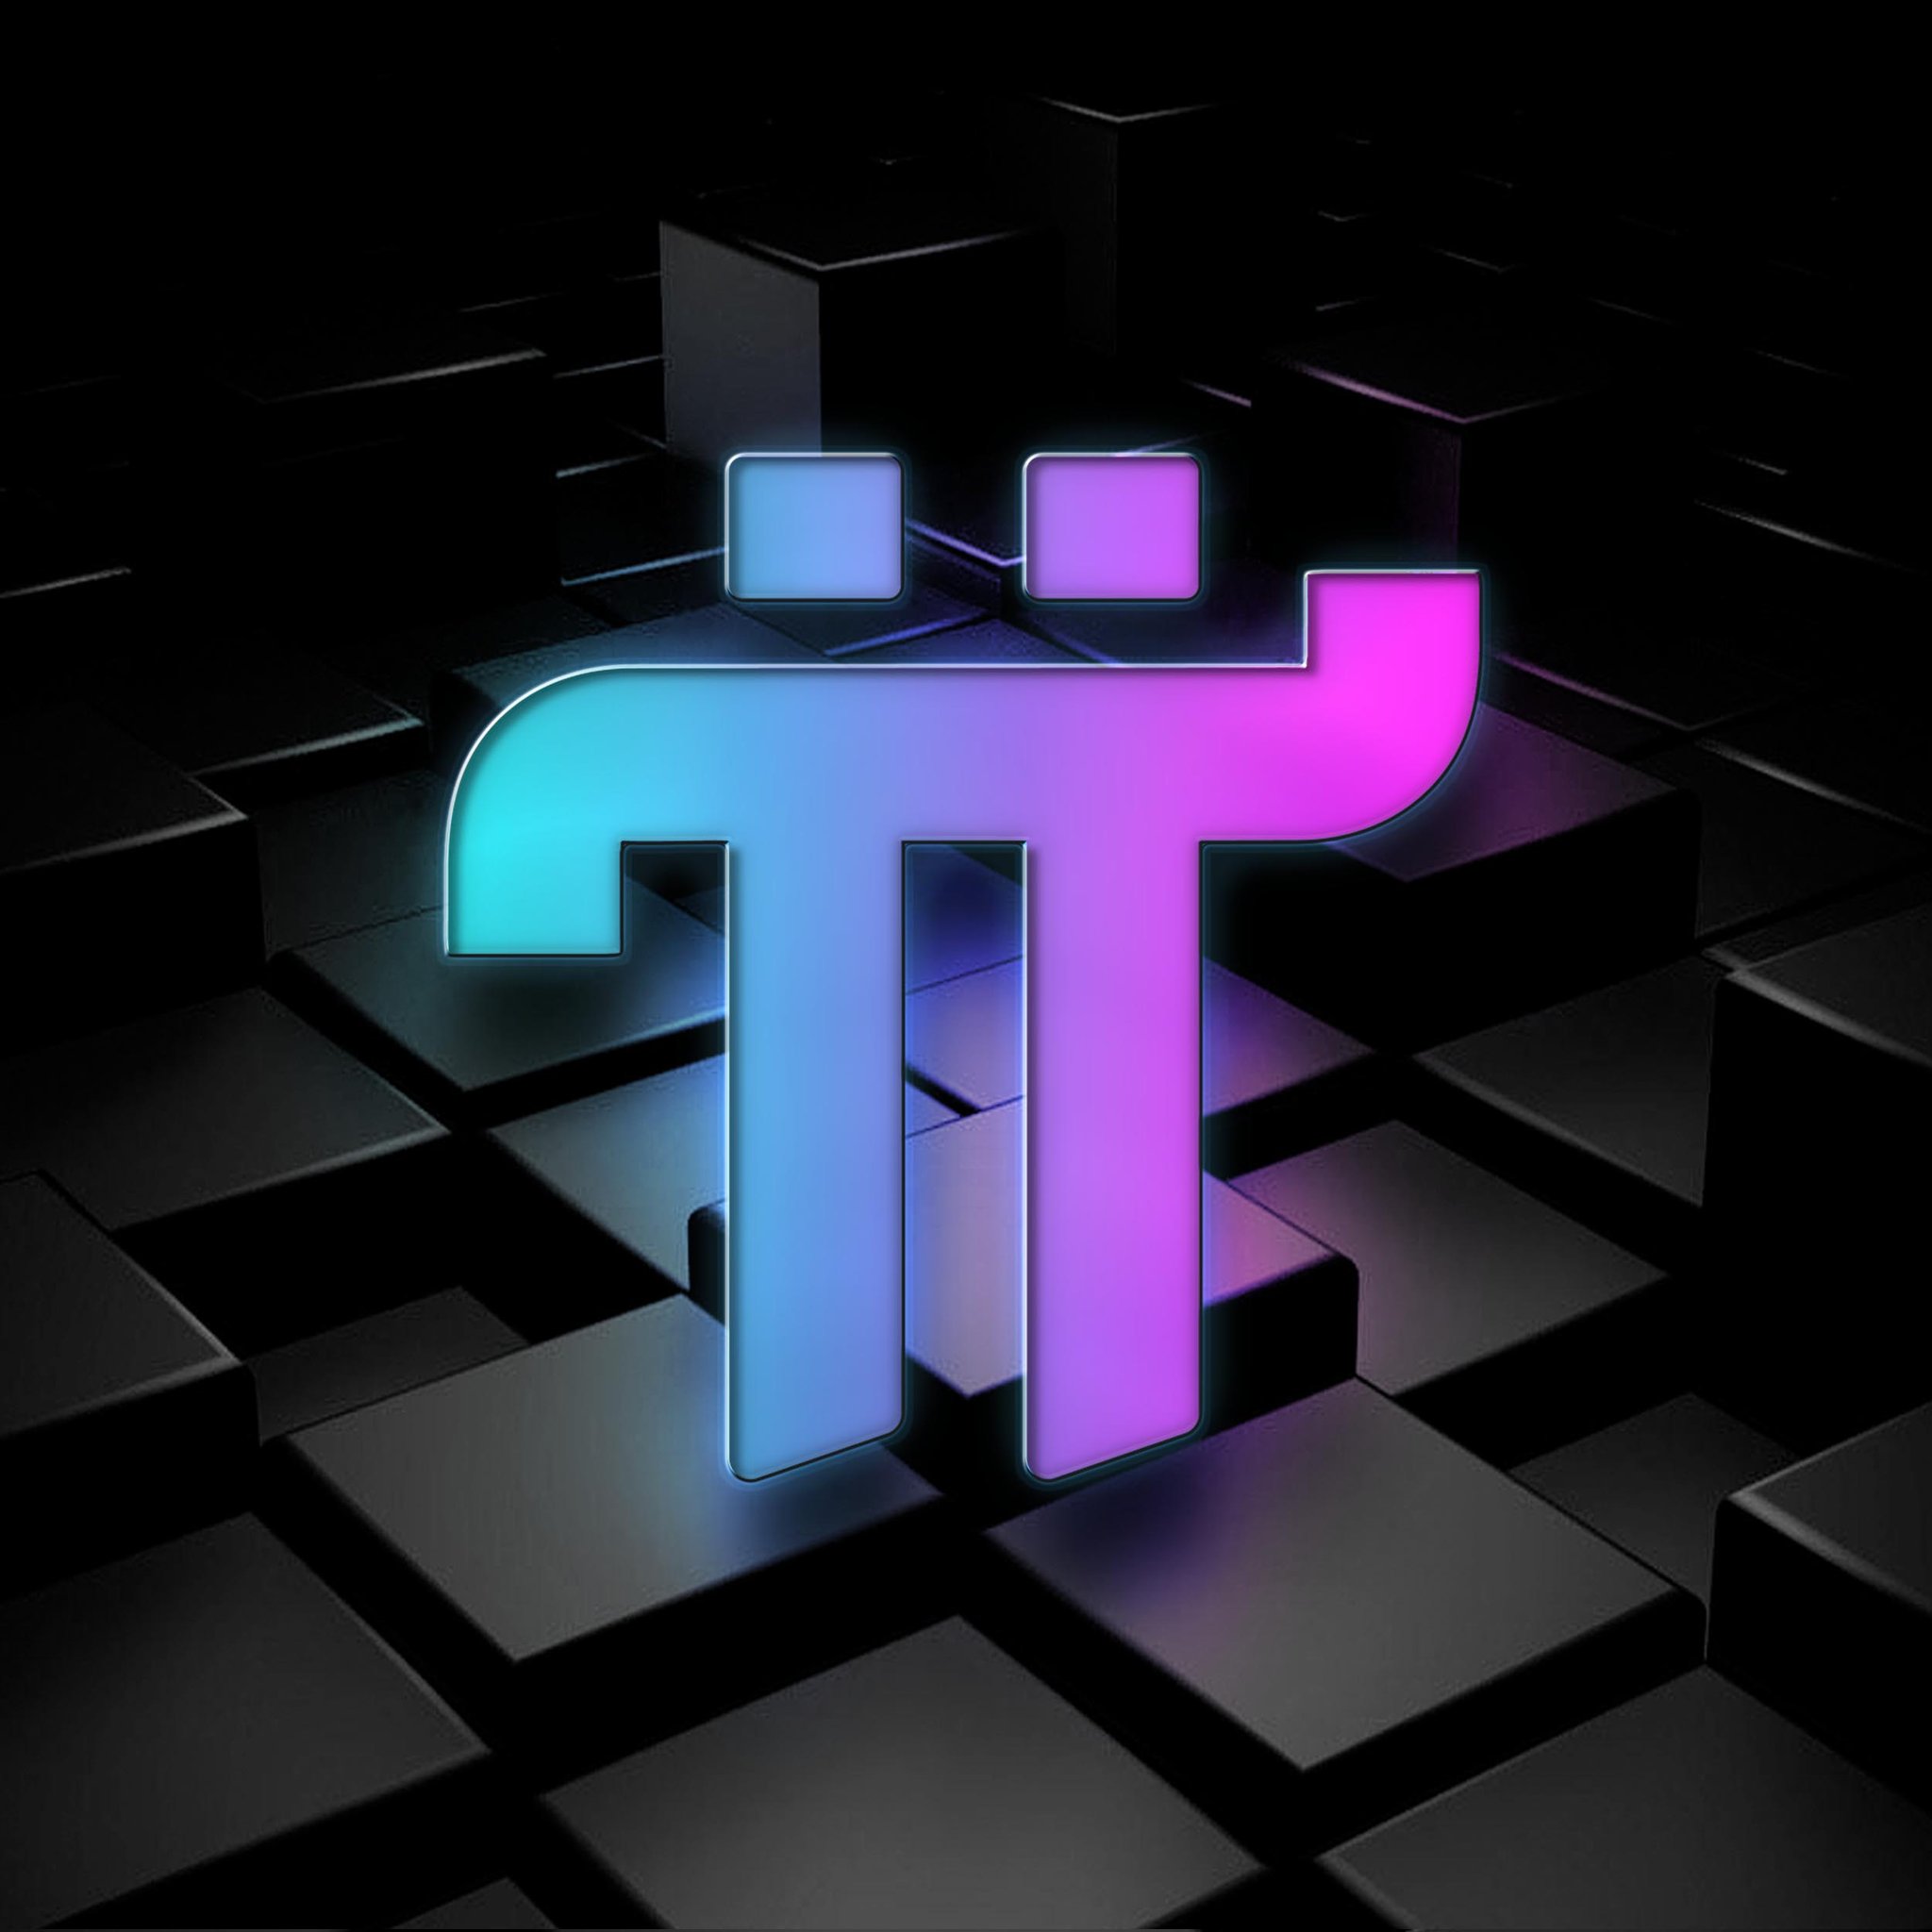 Pi Network's $314,159 Official Price Speculations - Reviews »